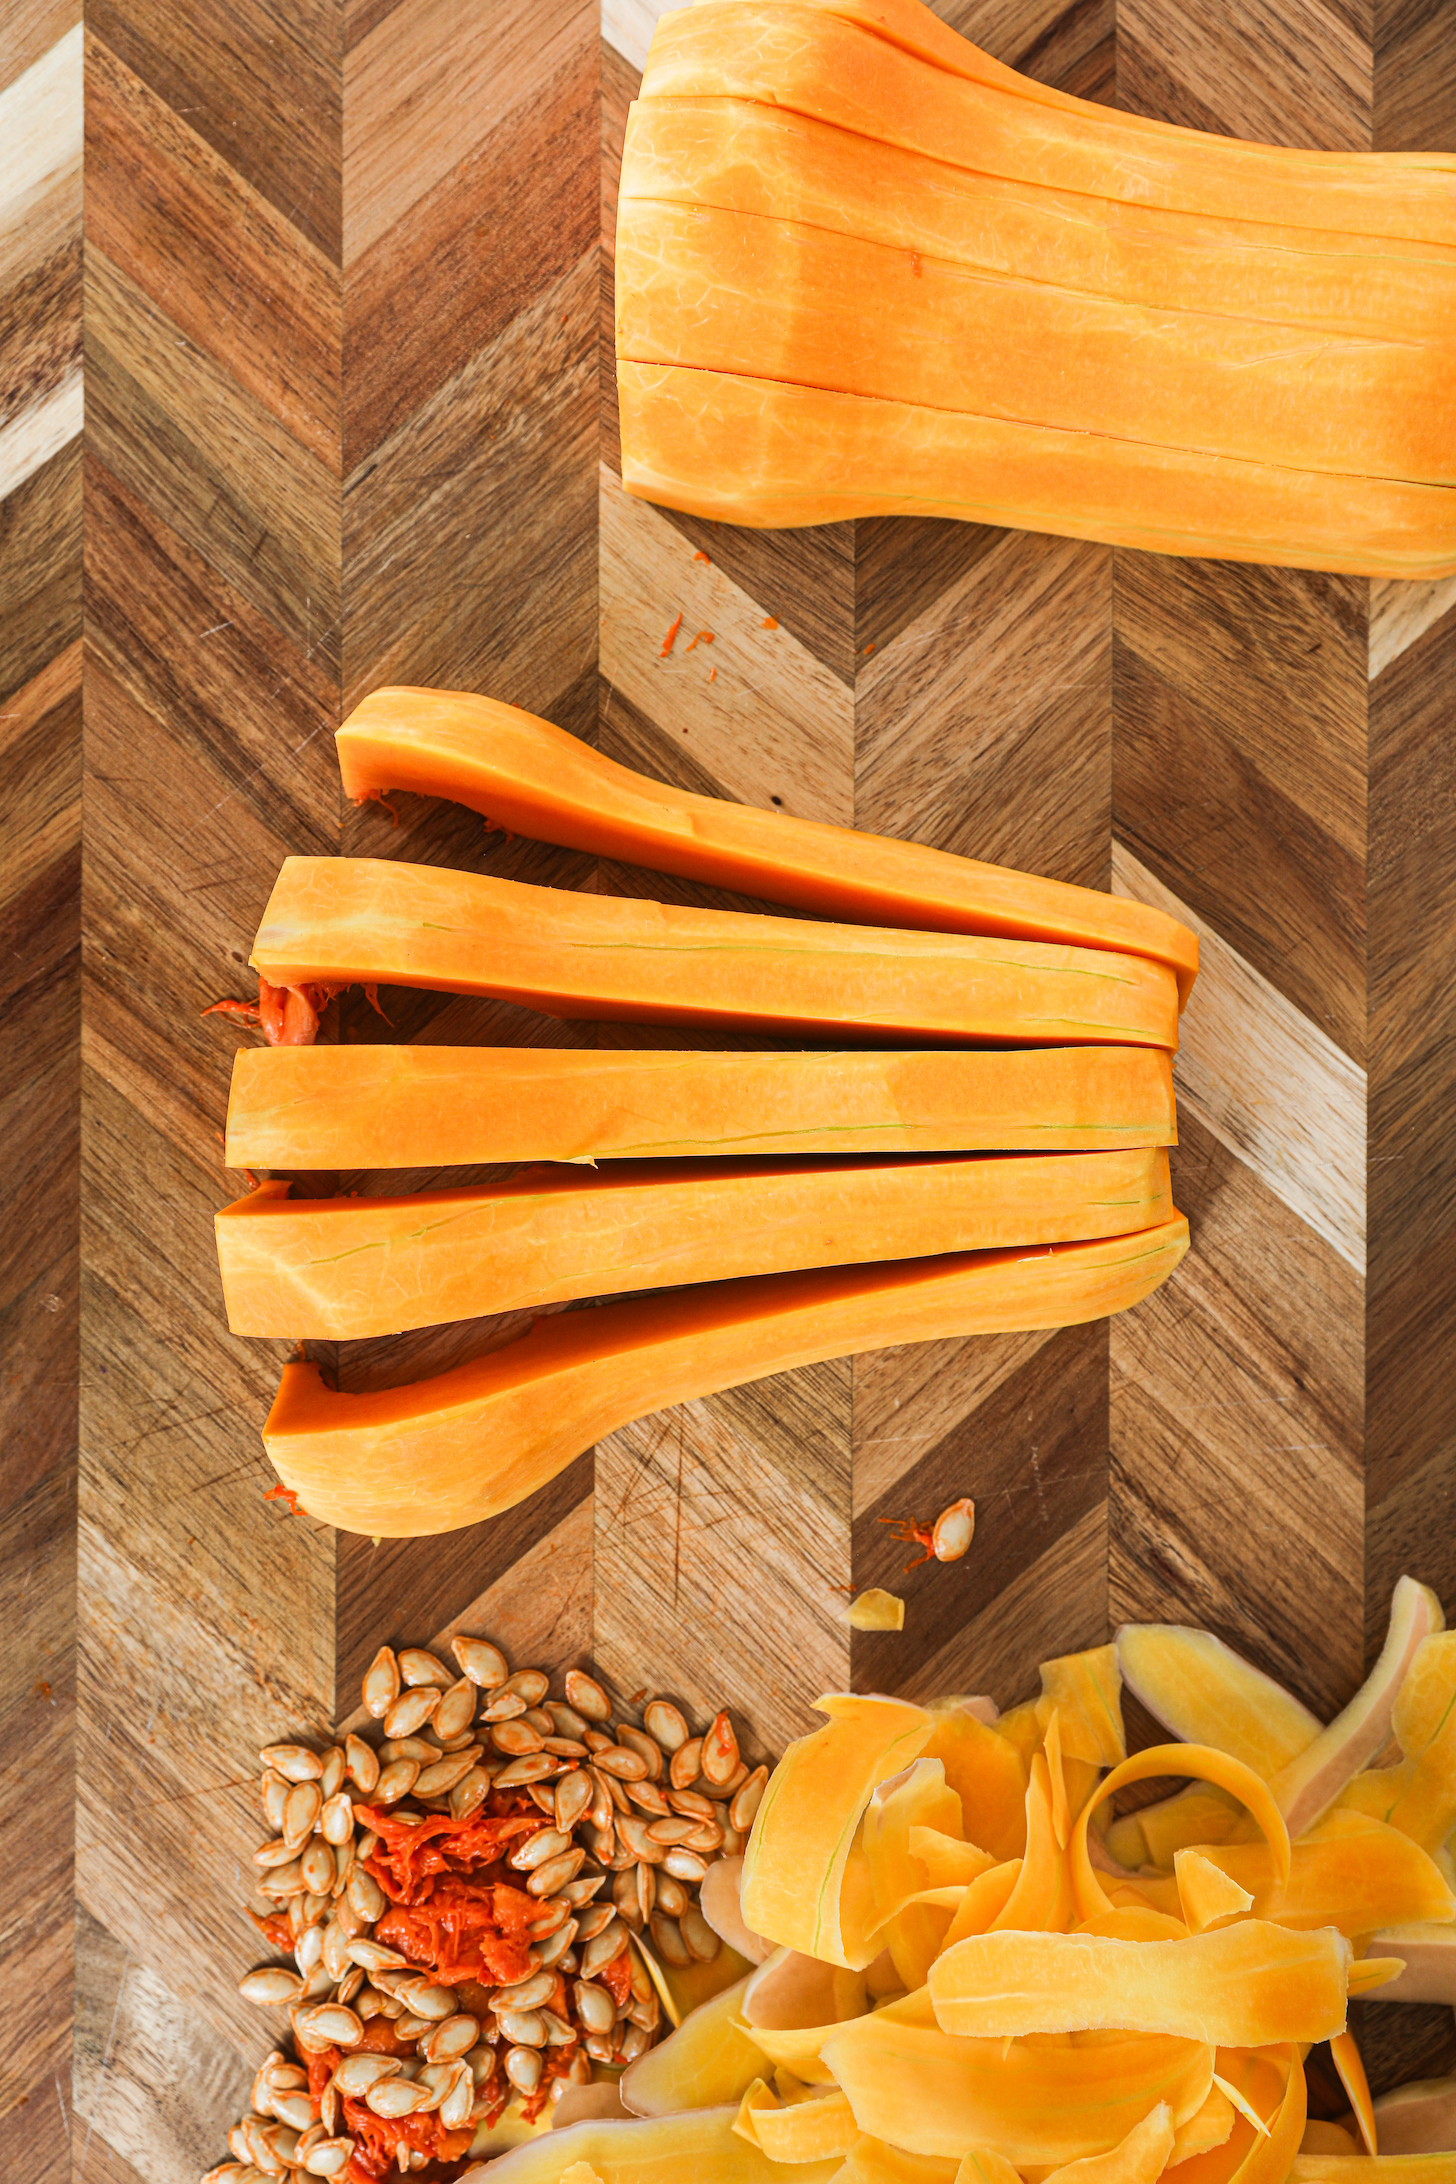 Two halves of butternut squash, each sliced into five pieces, with seeds and peelings on the side.